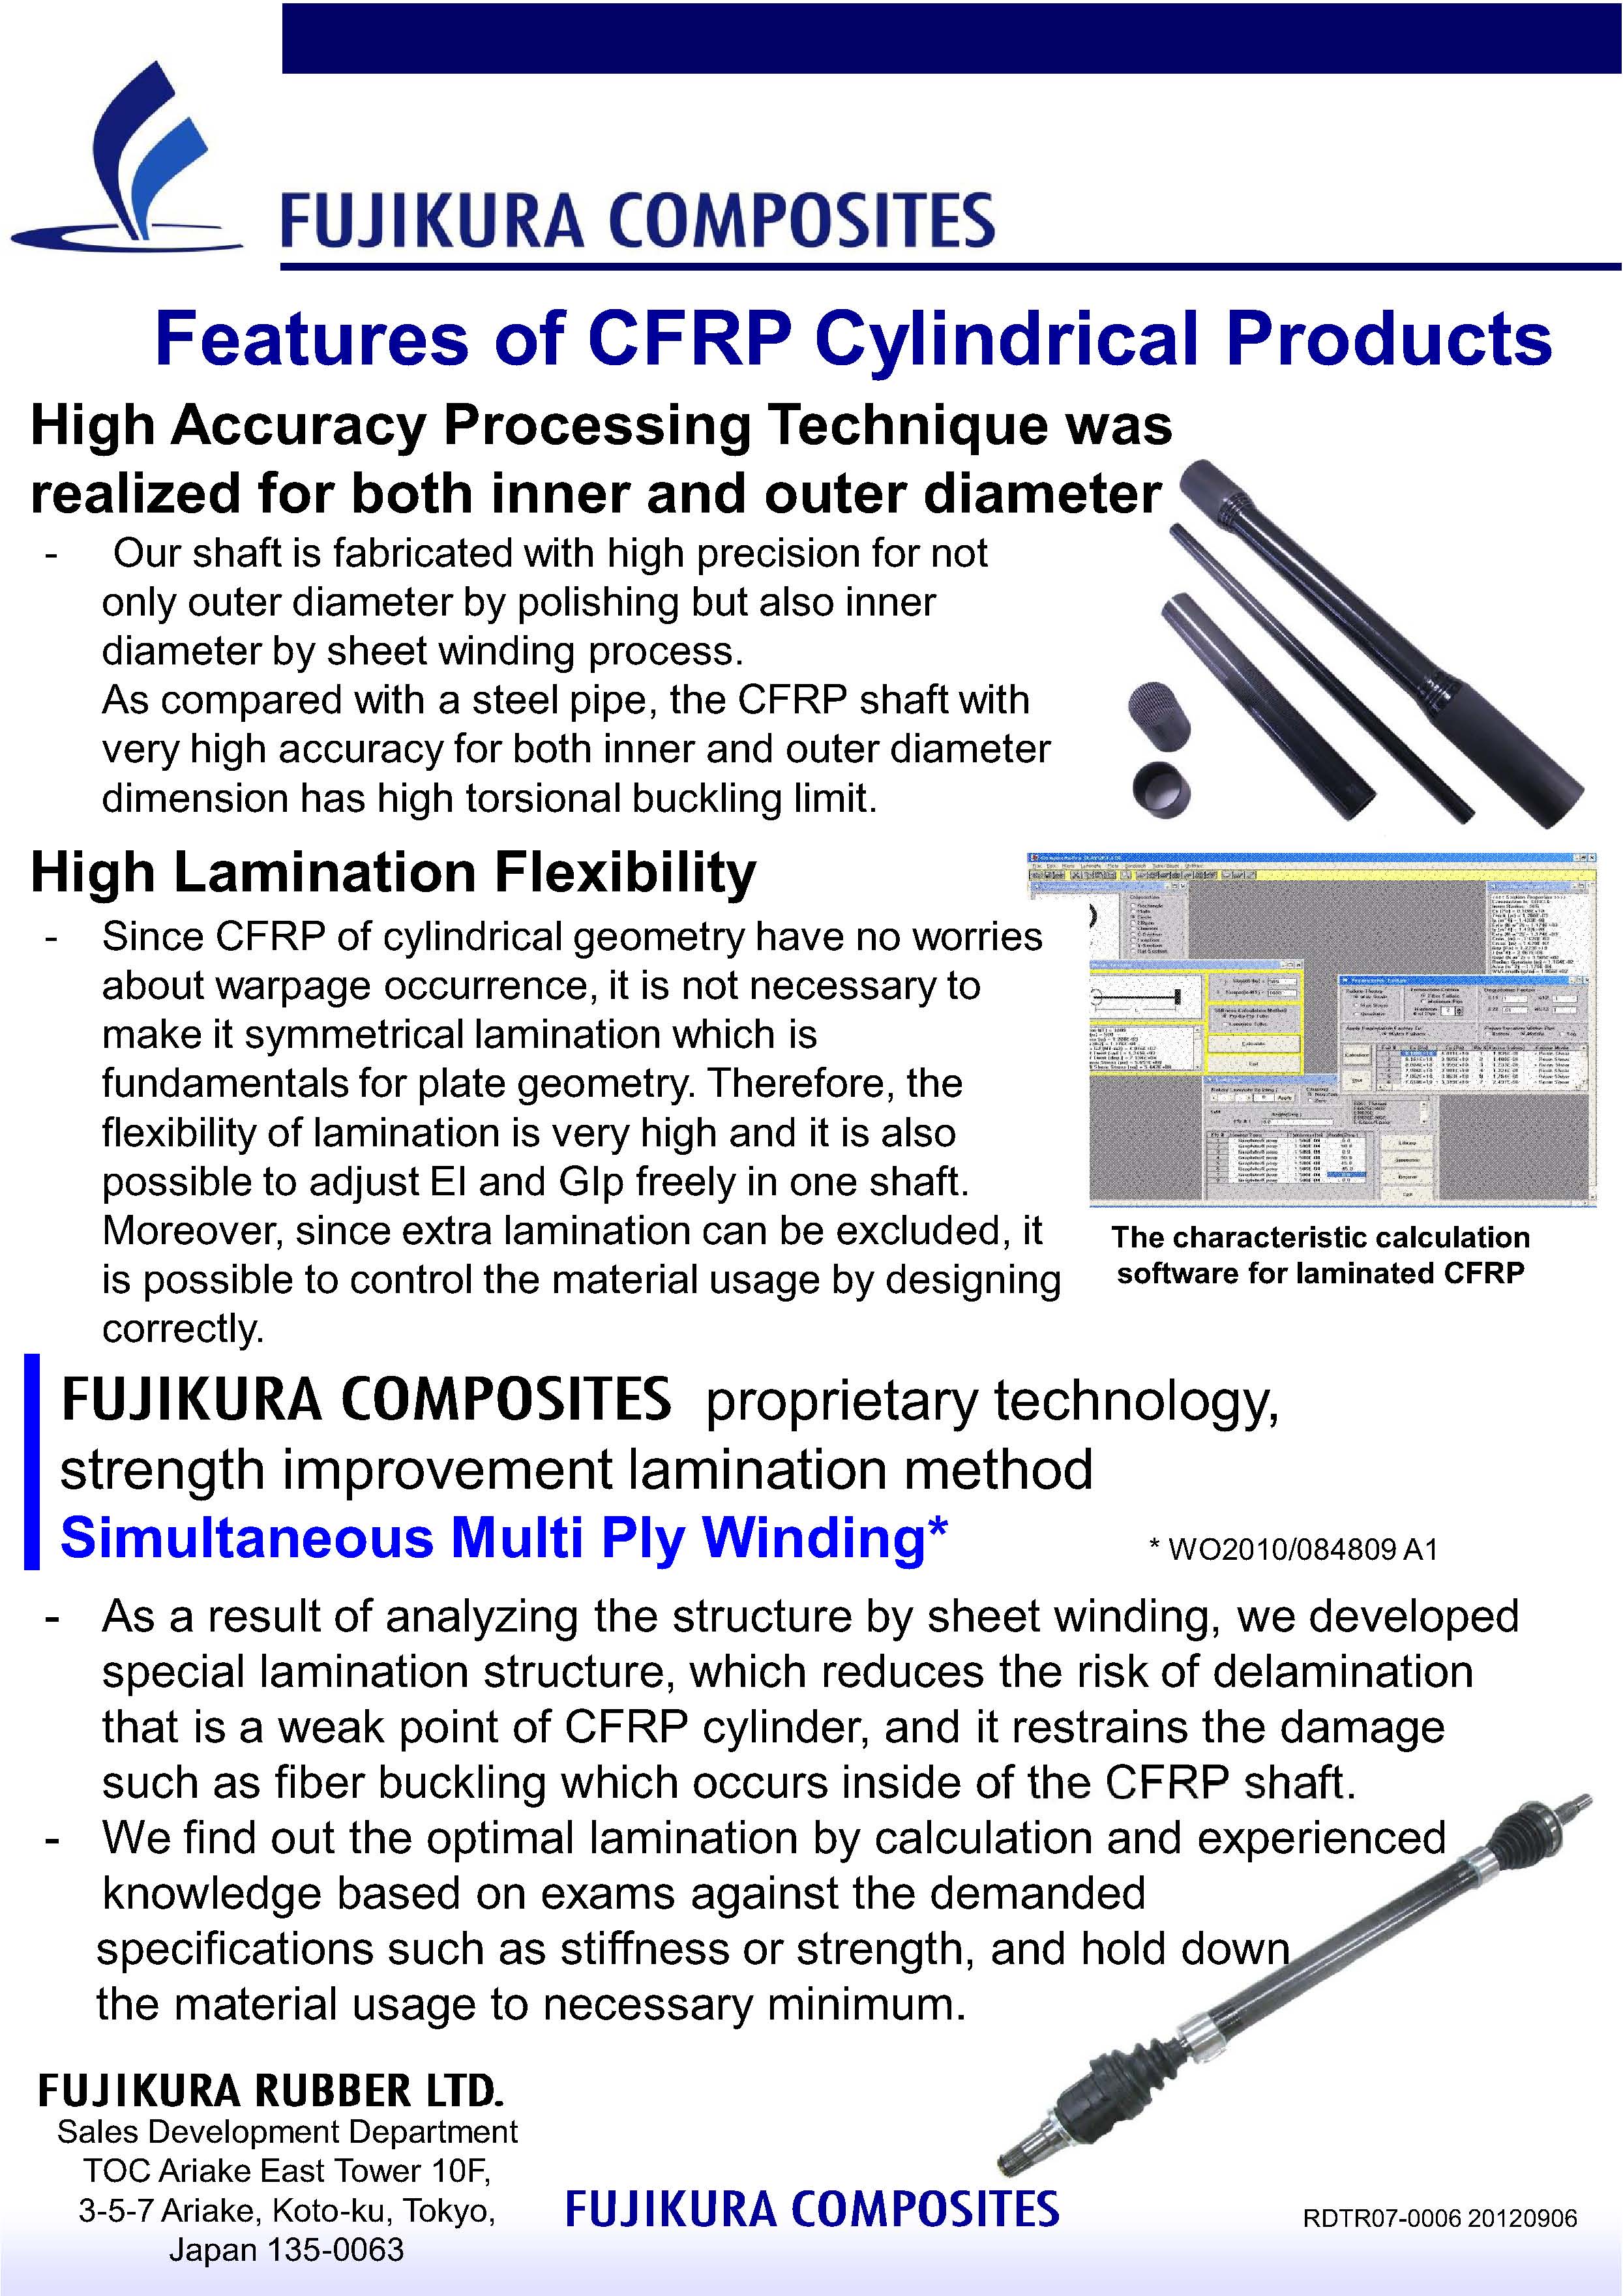 Characteristic of CFRP Cylindrical Products